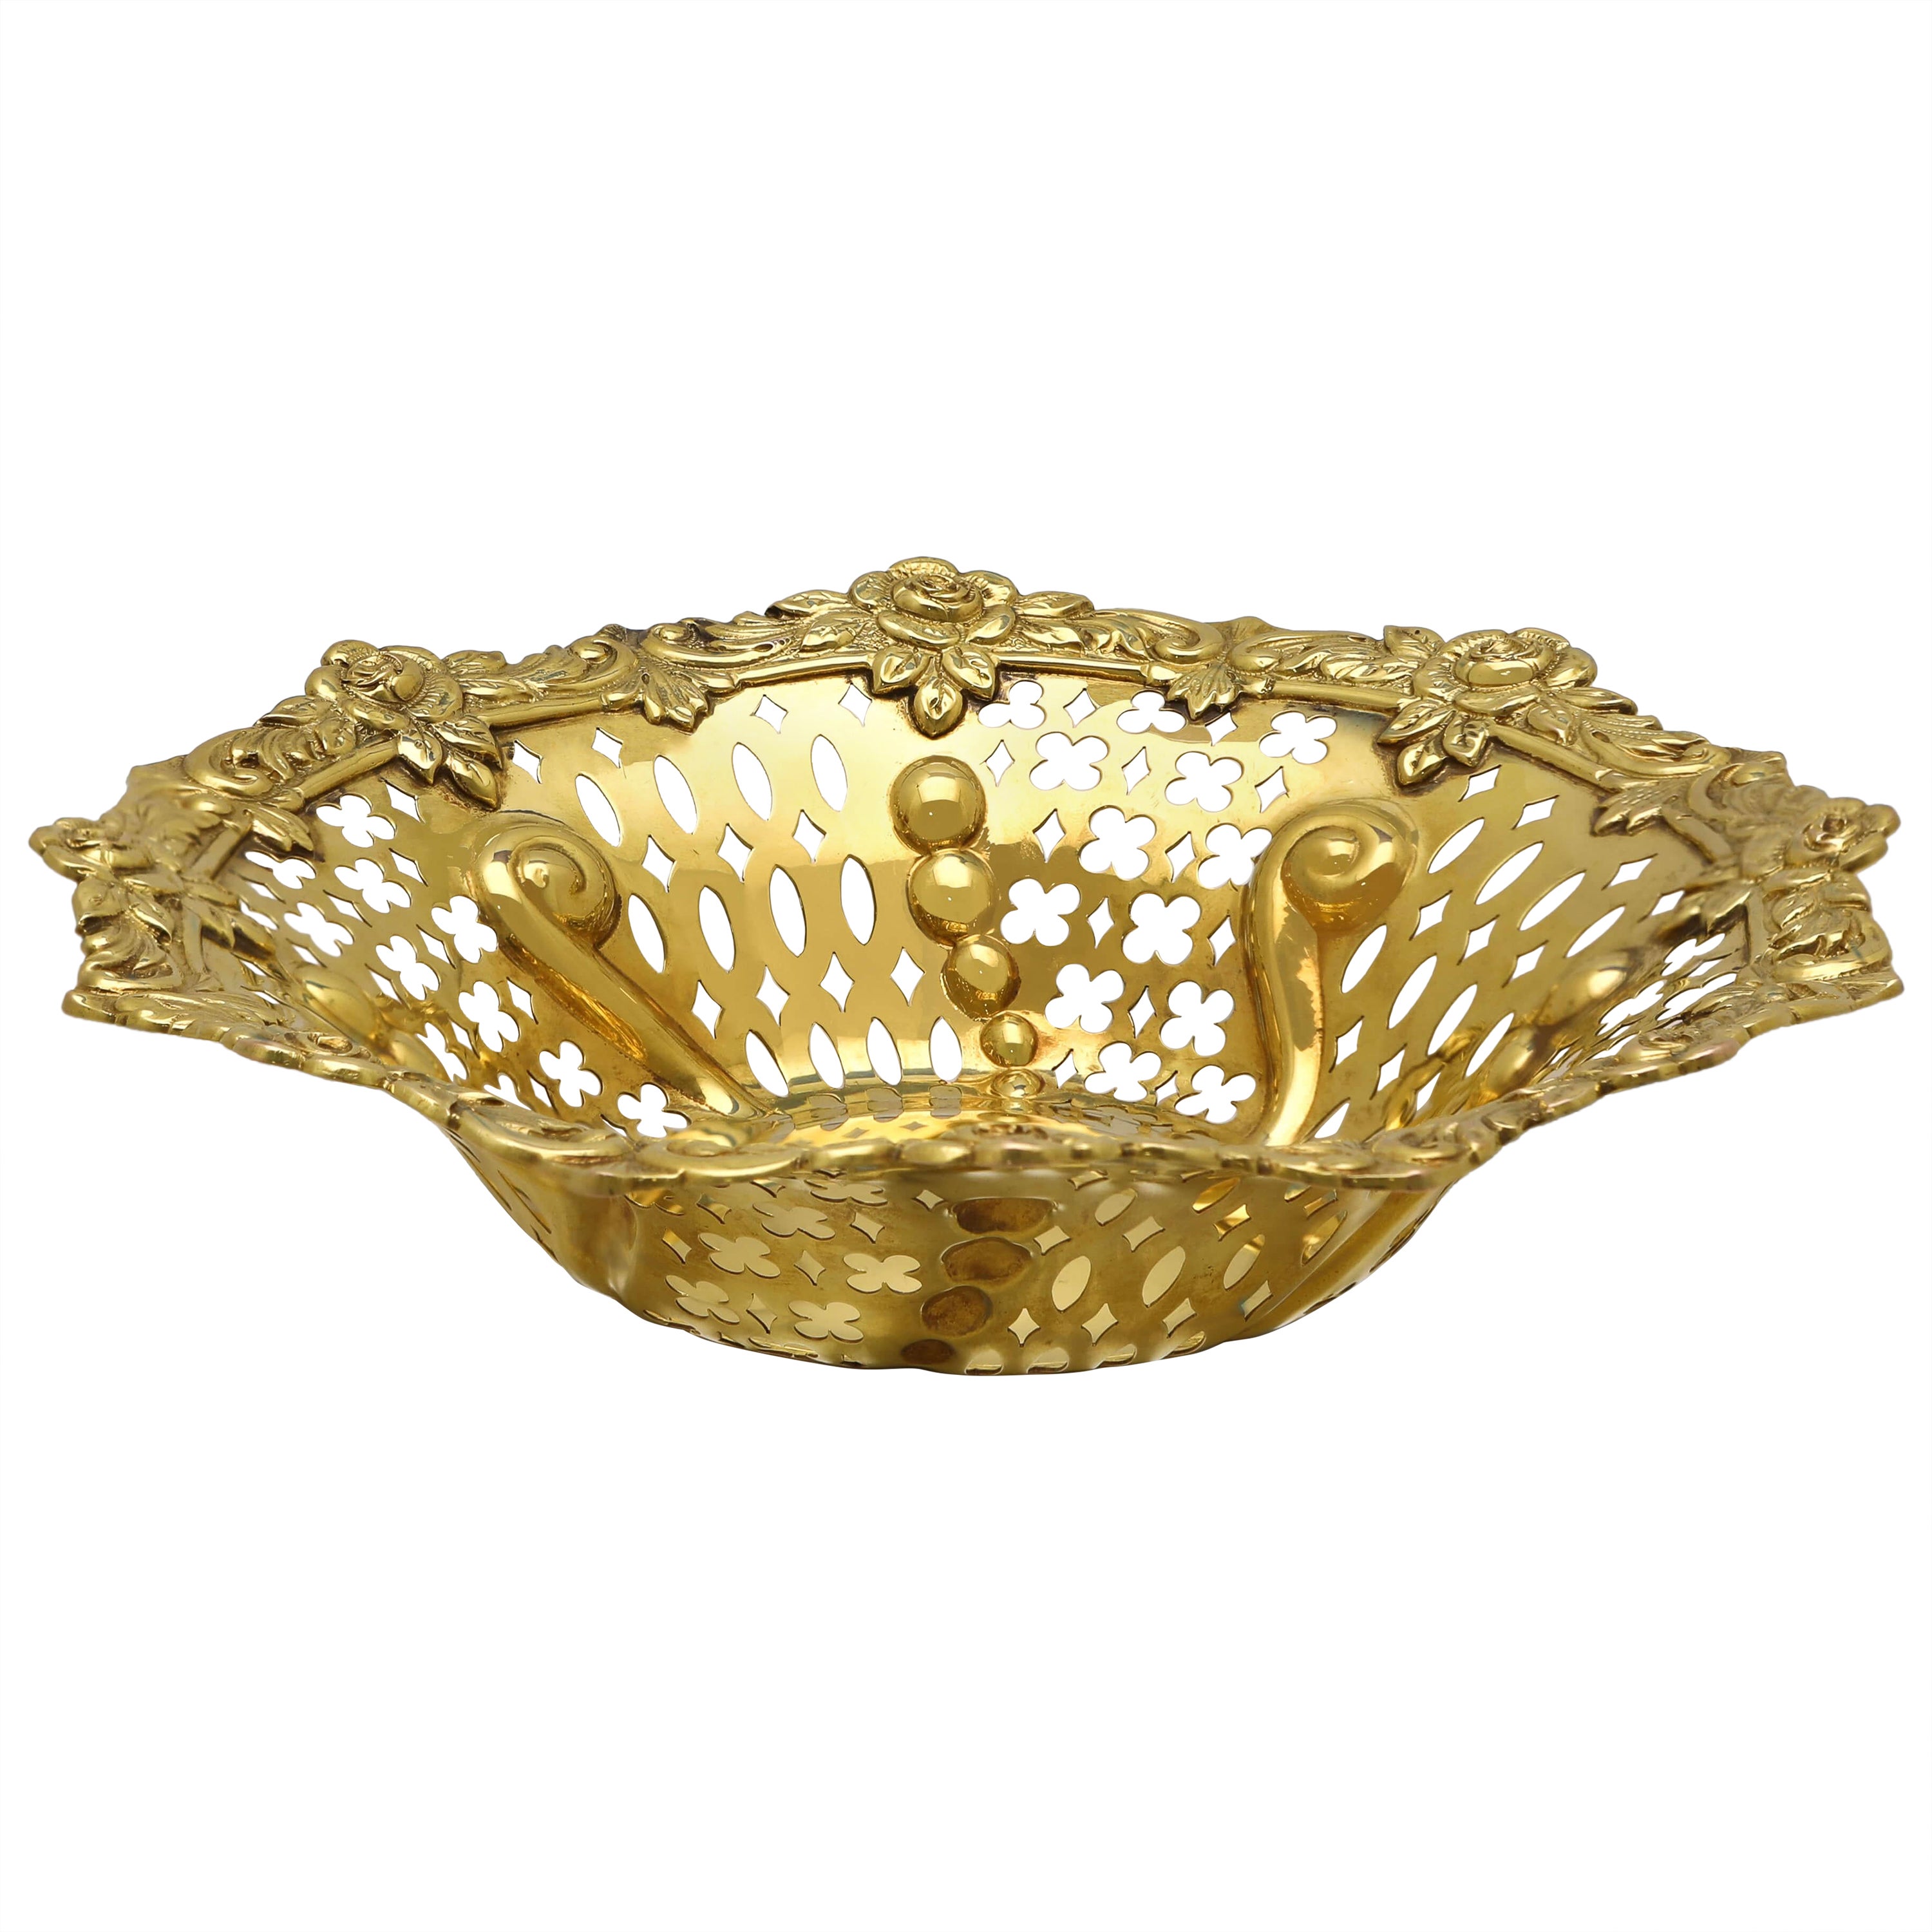 A very rare Edwardian 9ct gold dish by Mappin & Webb - London 1903 - 142.4g For Sale